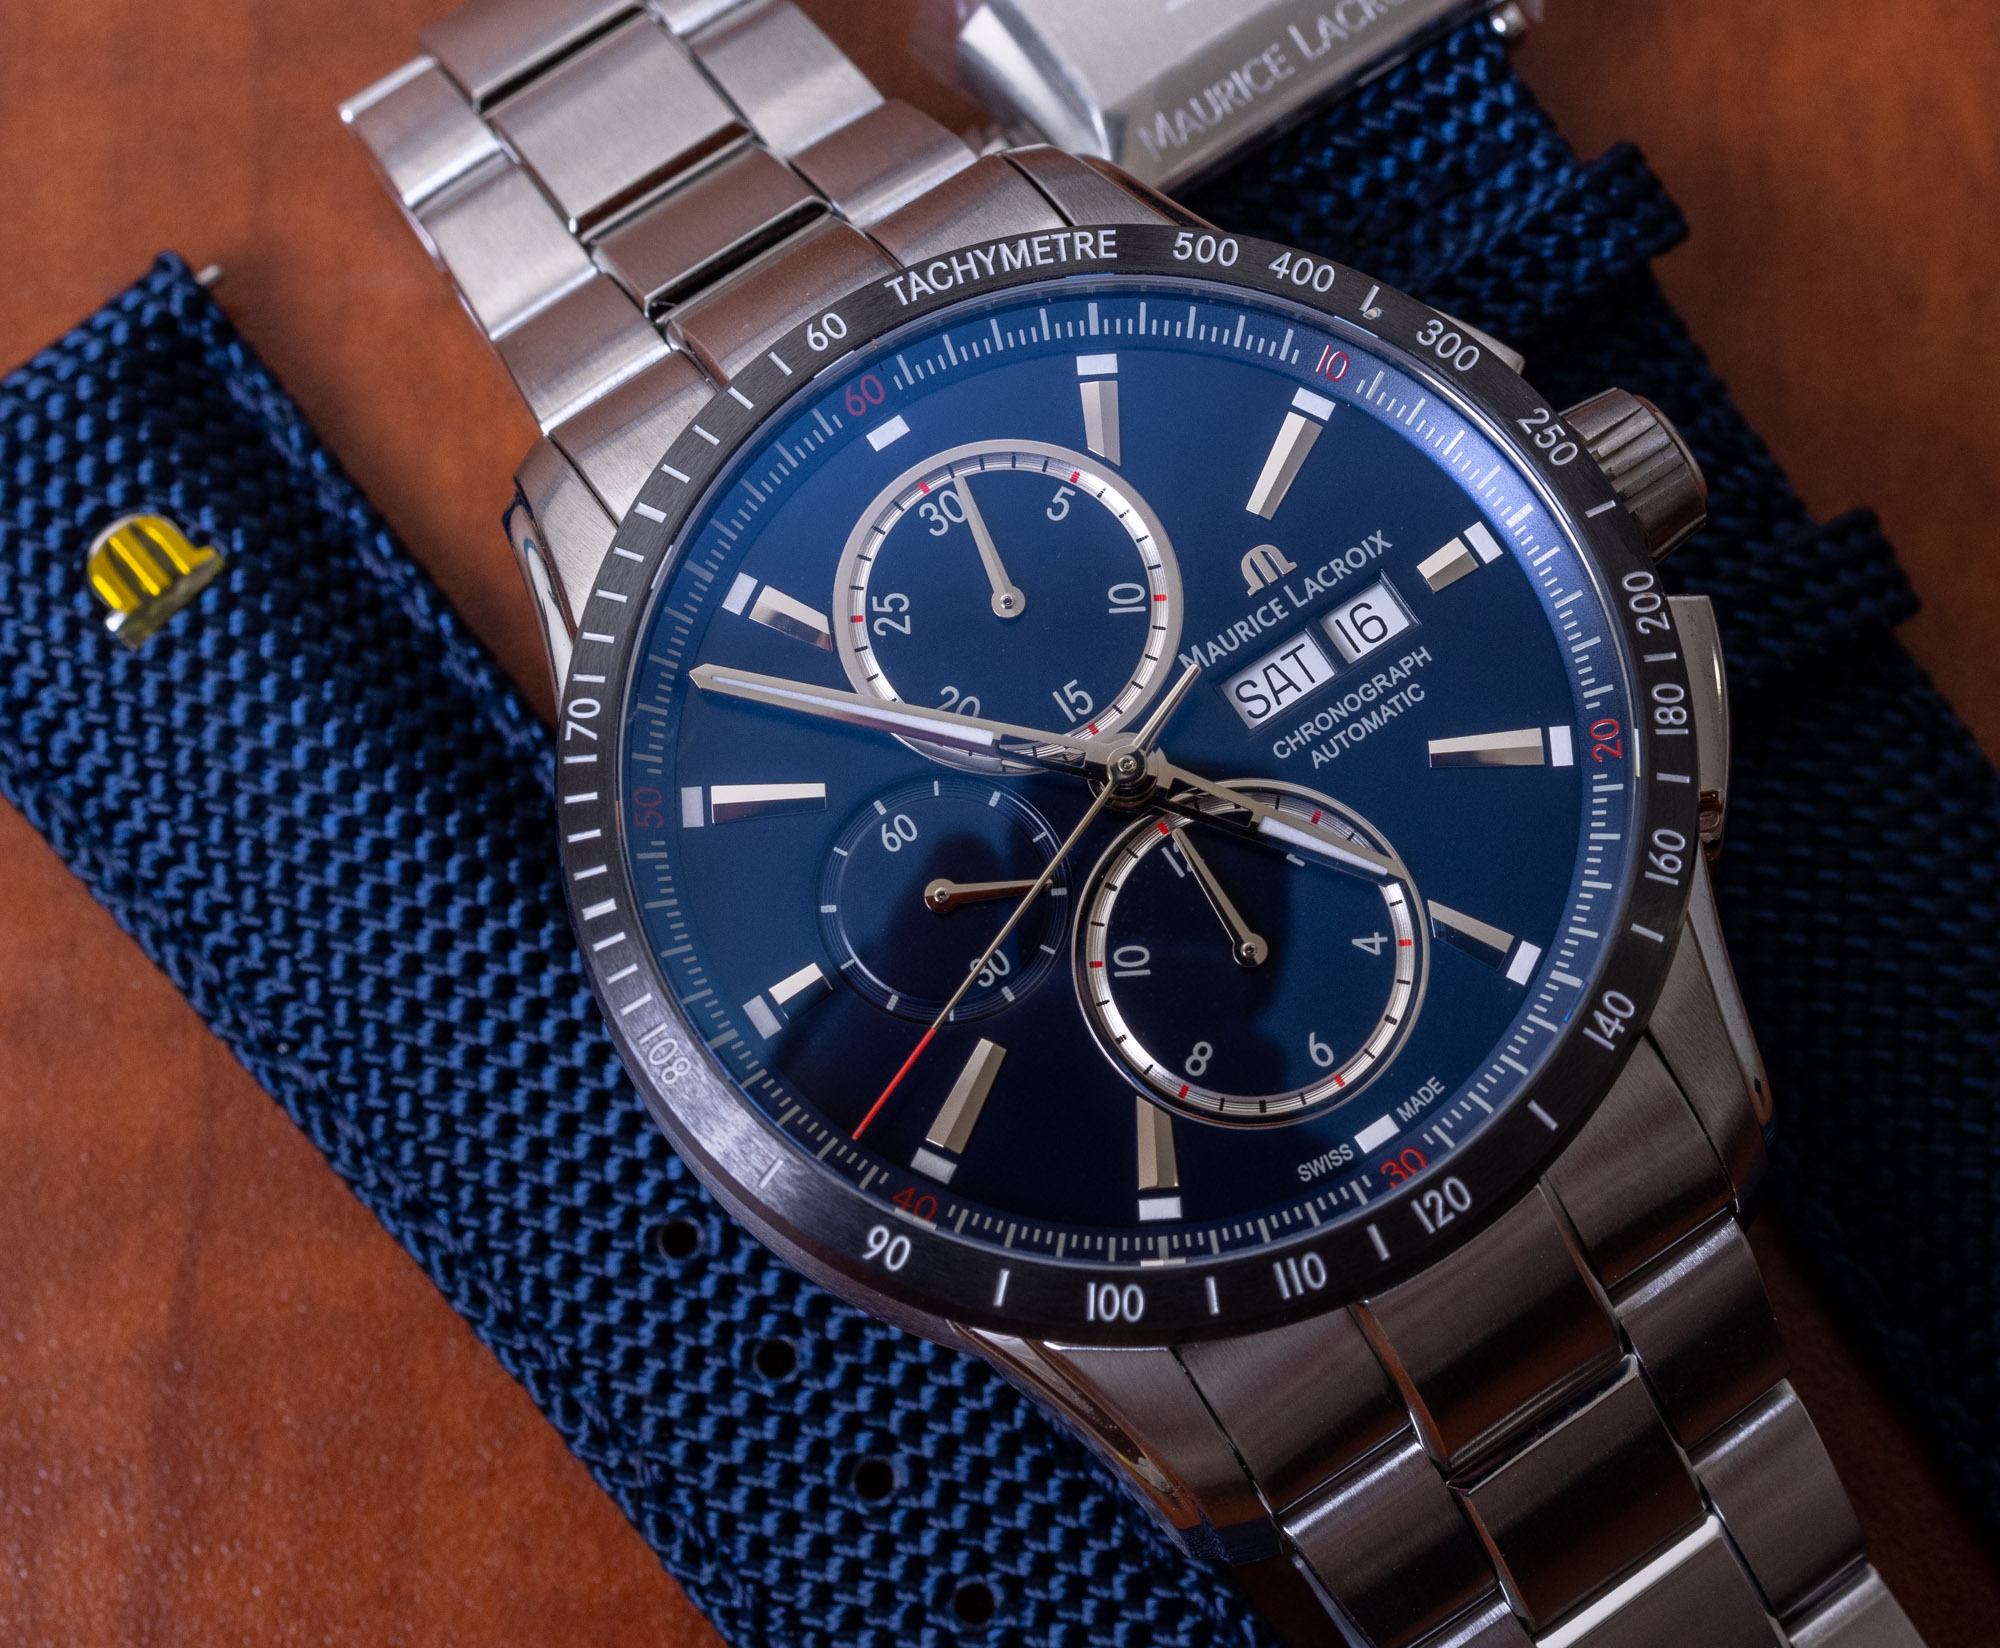 Watch Review: S Chronograph PONTOS 43mm Lacroix Maurice | aBlogtoWatch